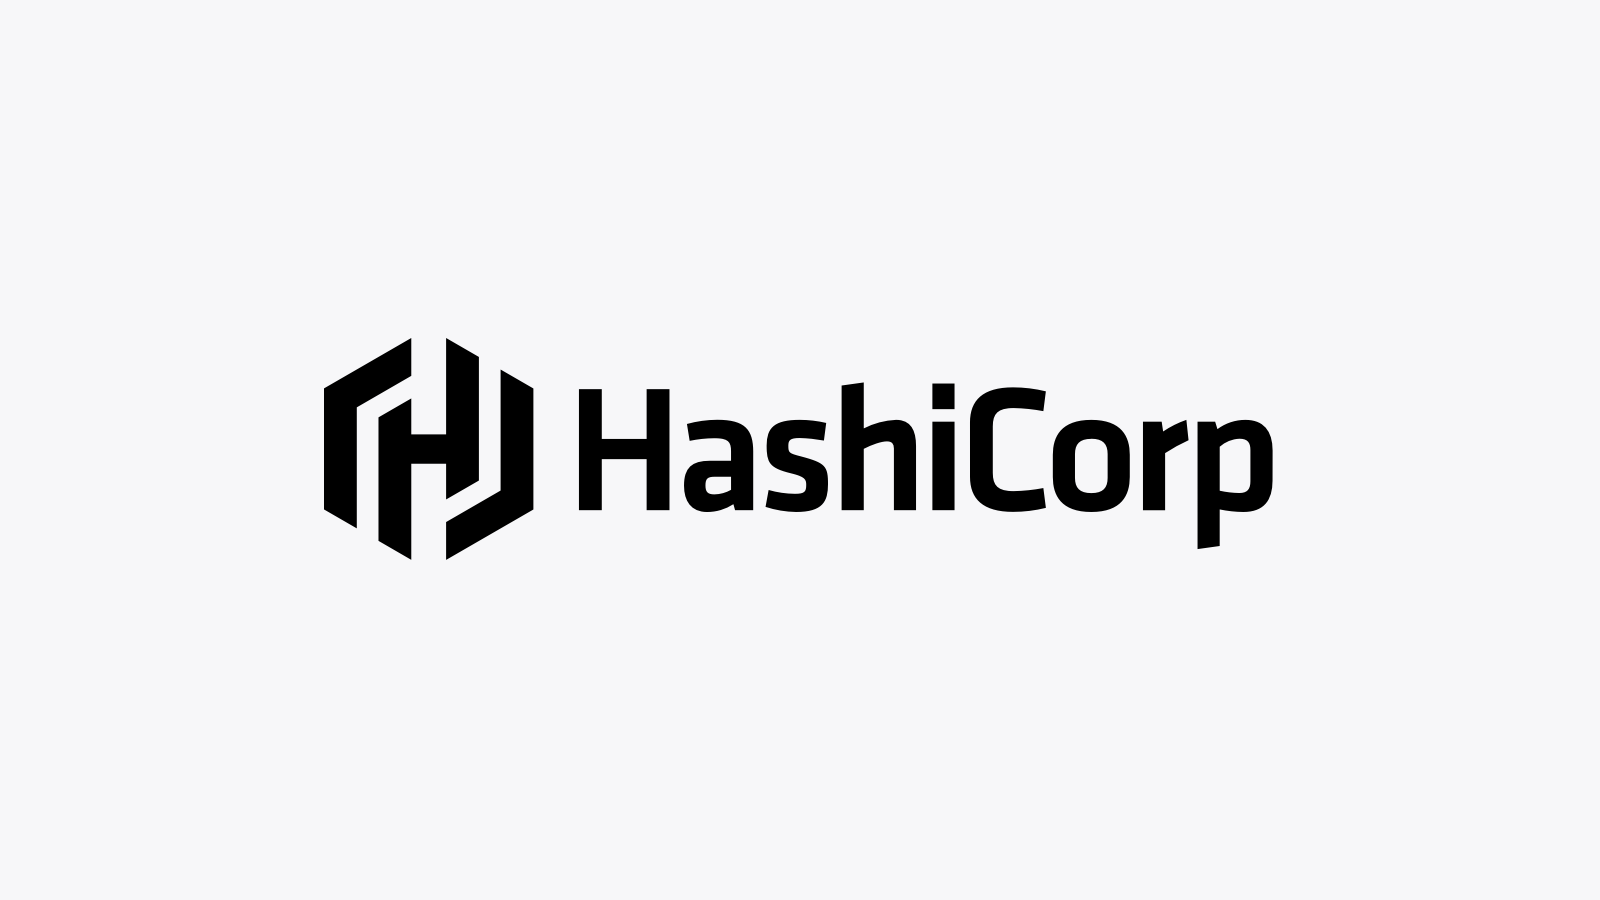 HashiCorp’s Security and Compliance Program Takes Another Step Forward